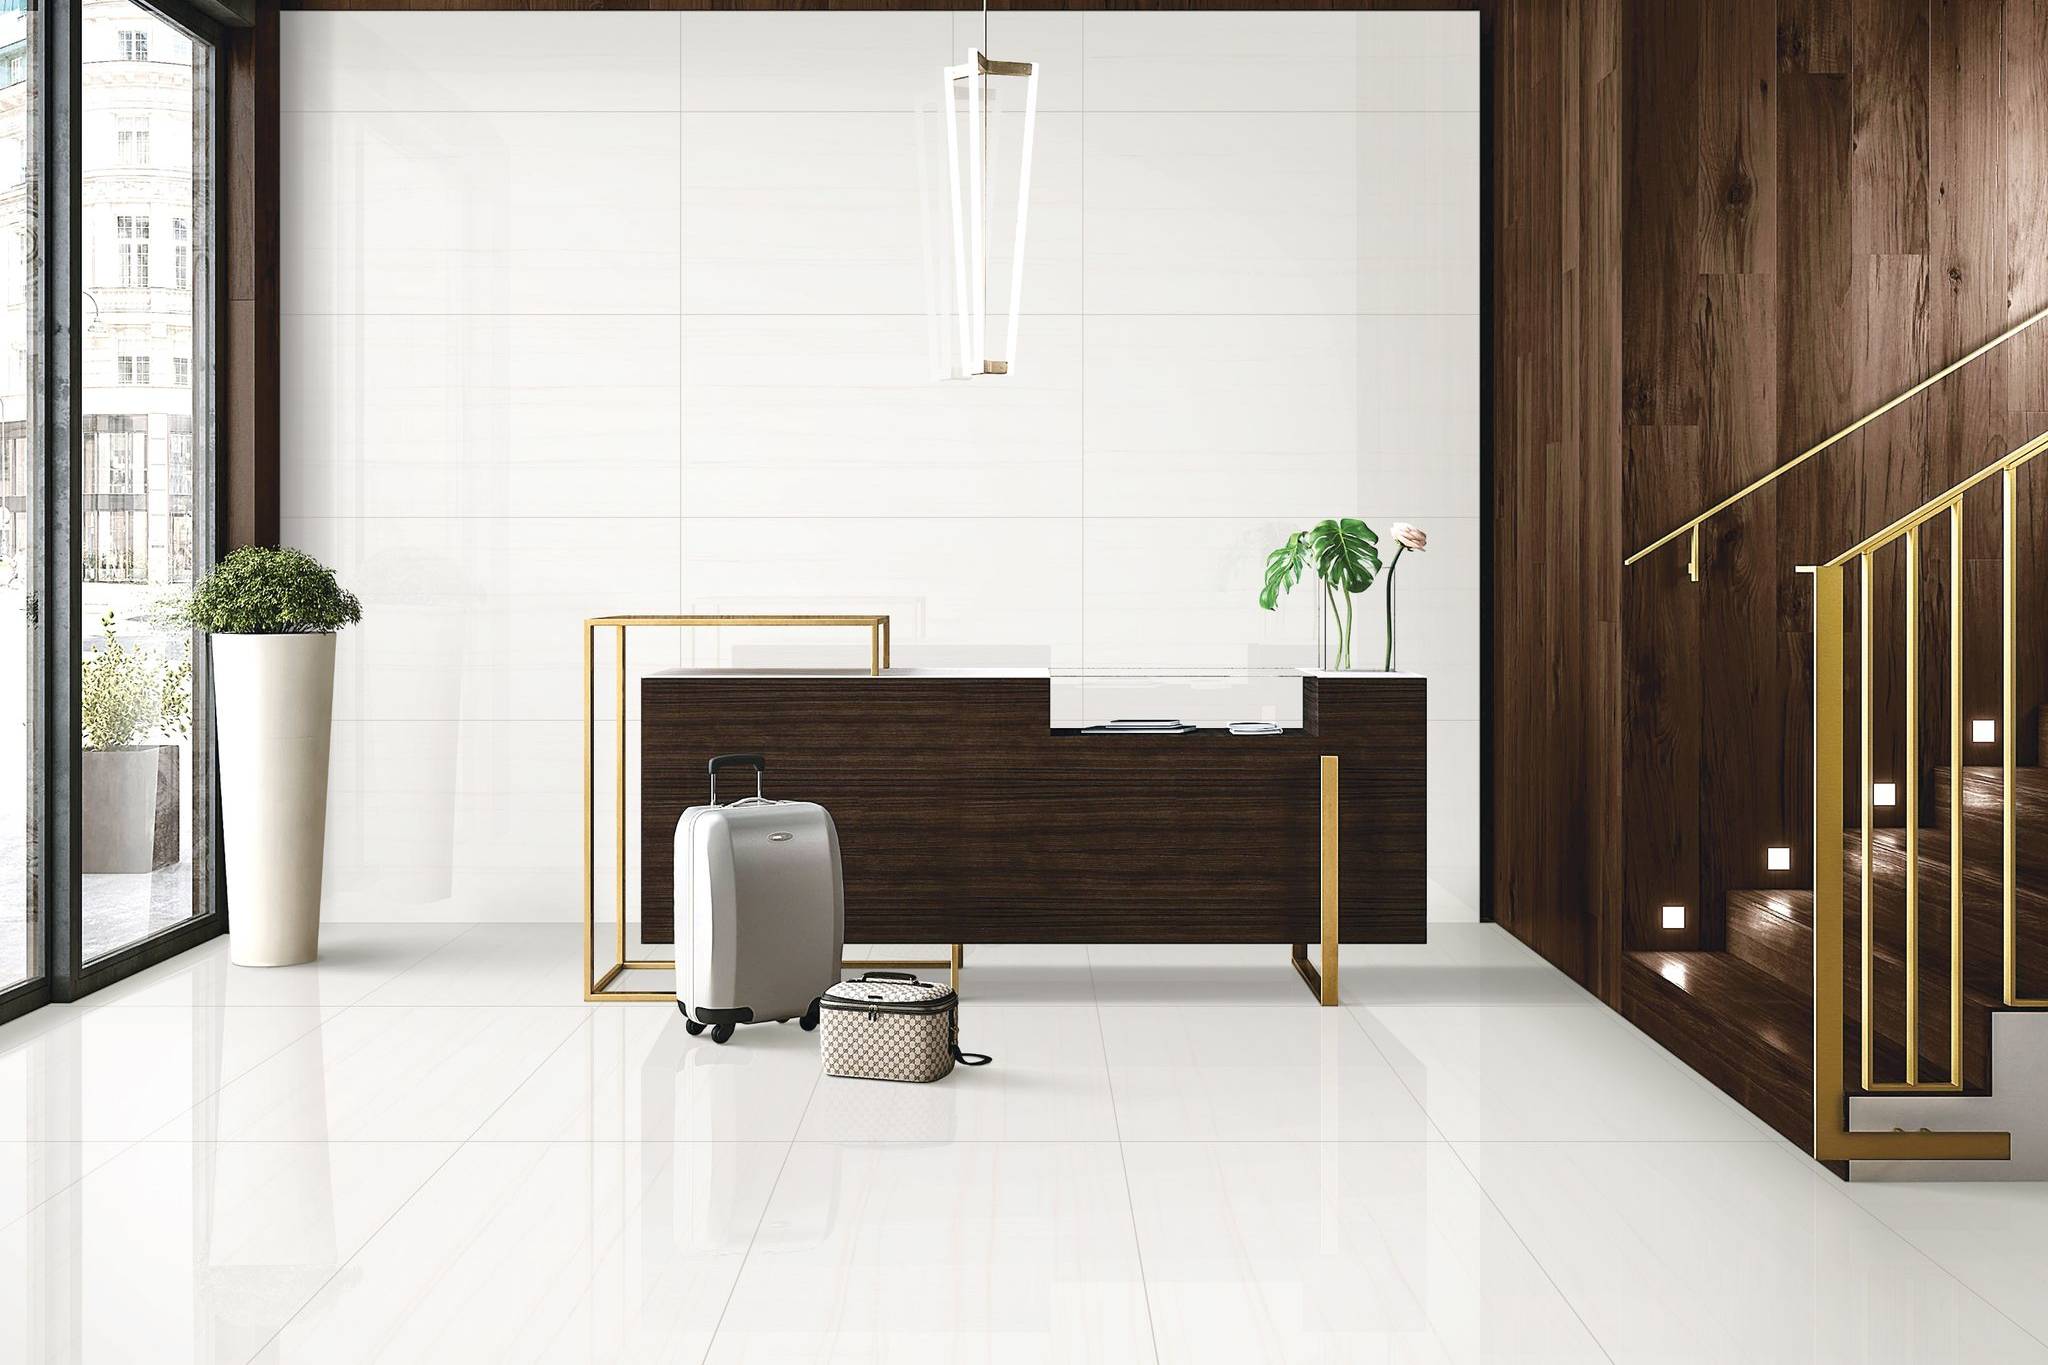 Treasure Ultimate Dolomite Polished | Qualis Ceramica | Luxury Tile and Vinyl at affordable prices